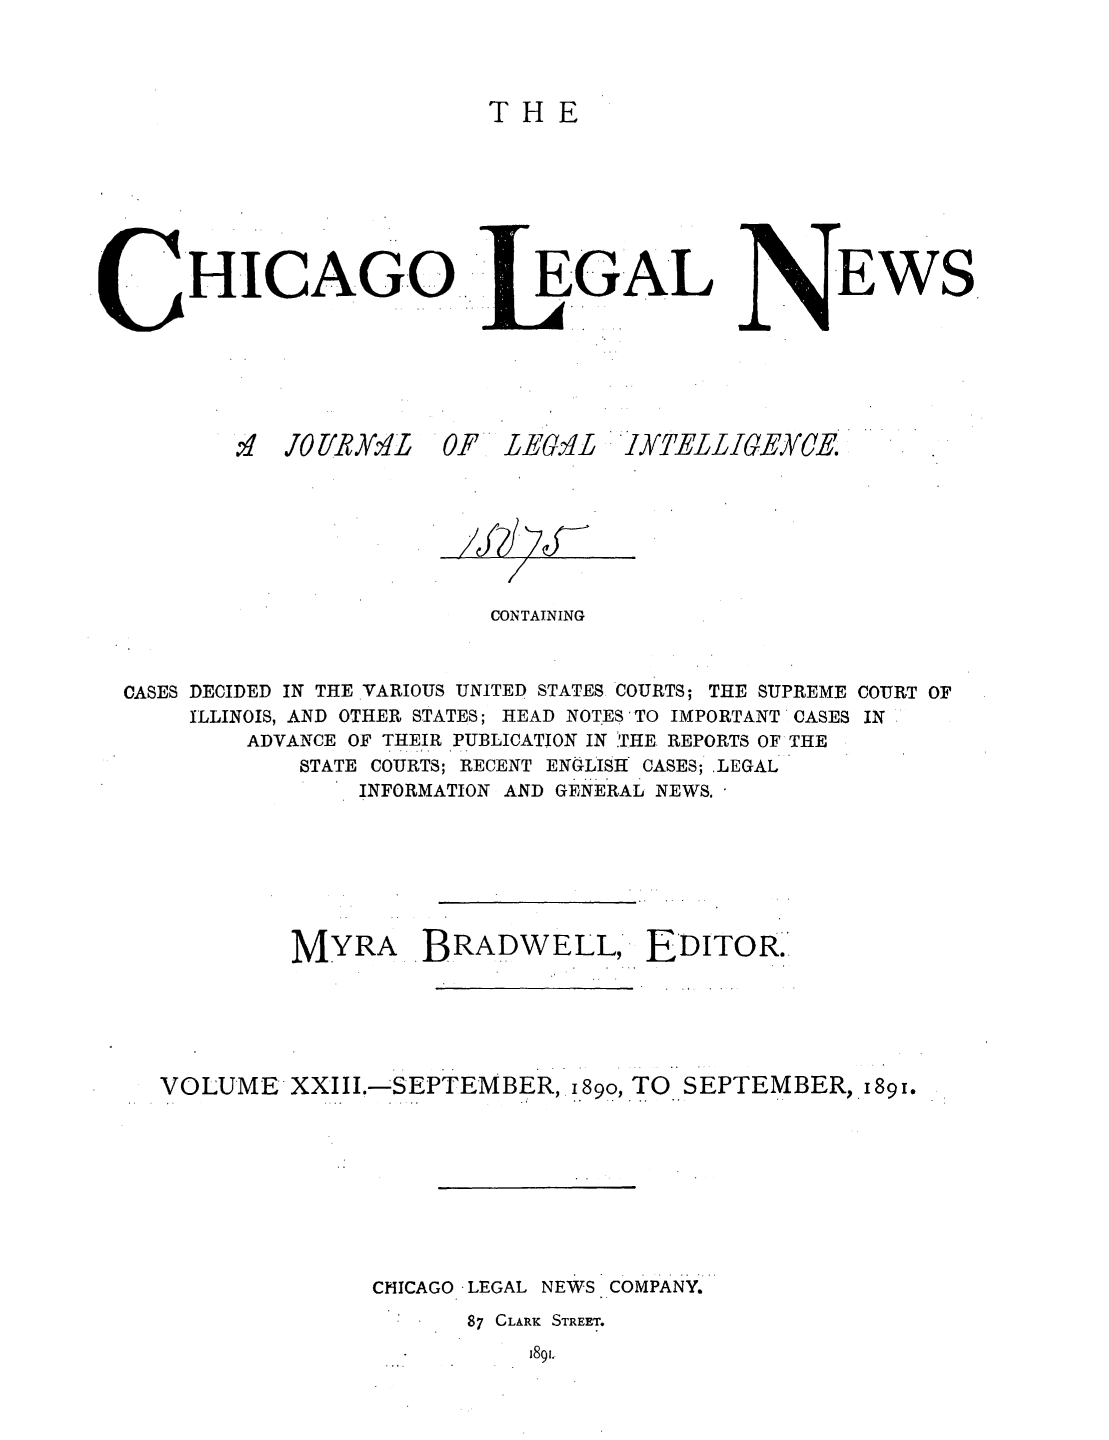 handle is hein.journals/chiclene23 and id is 1 raw text is: THE

HICAGO

EGAL

EWS

1.1  J70f/R.Y.1L

OF LE61-L IXTELLIGEYCE.

CONTAINING

CASES DECIDED IN THE VARIOUS UNITED STATES COURTS; THE SUPREME COURT OF
ILLINOIS, AND OTHER STATES; HEAD NOTES'TO IMPORTANT CASES IN
ADVANCE OF THEIR PUBLICATION IN ?rHE REPORTS OF THE
STATE COURTS; RECENT ENGLISt CASES; LEGAL
INFORMATION AND GENERAL NEWS.'
MYRA BRADWELL EDITOR.
VOLUME XXIII.--SEPTEMBER, i89o, TO SEPTEMBER, I891.
CHICAGO LEGAL NEWS COMPANY.
87 CLARK STREET.
1891.


